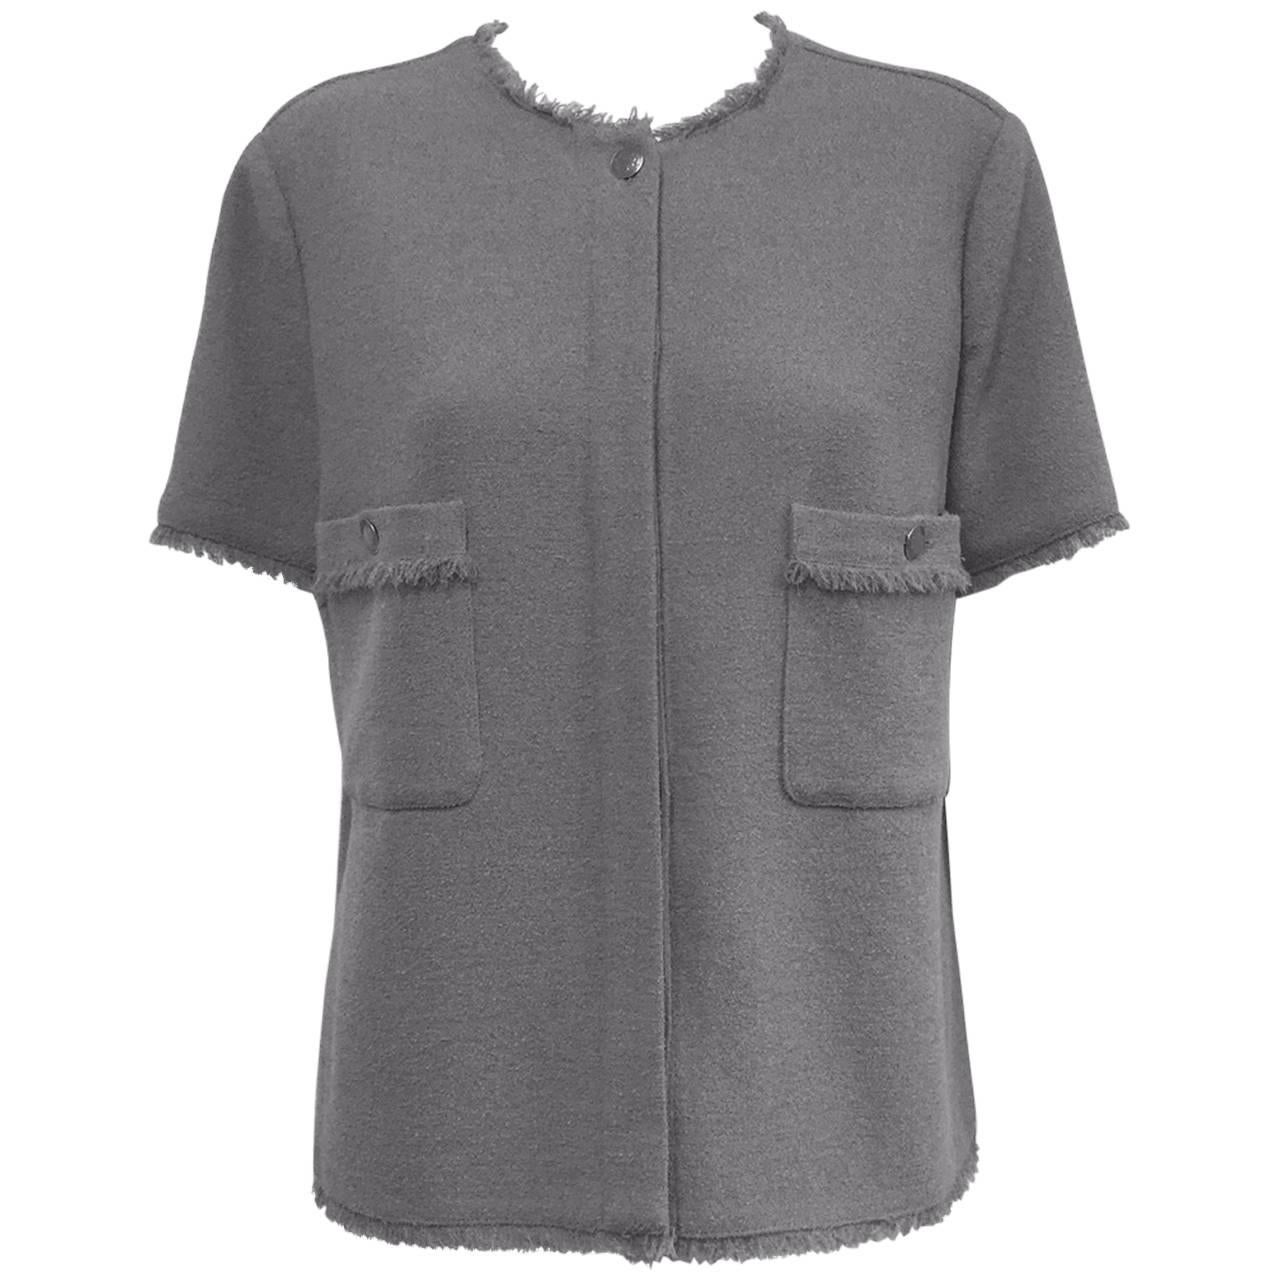 Chanel Cruise 2008 Steel Grey Wool Short Sleeve Blouse With Chain Weight at Hem